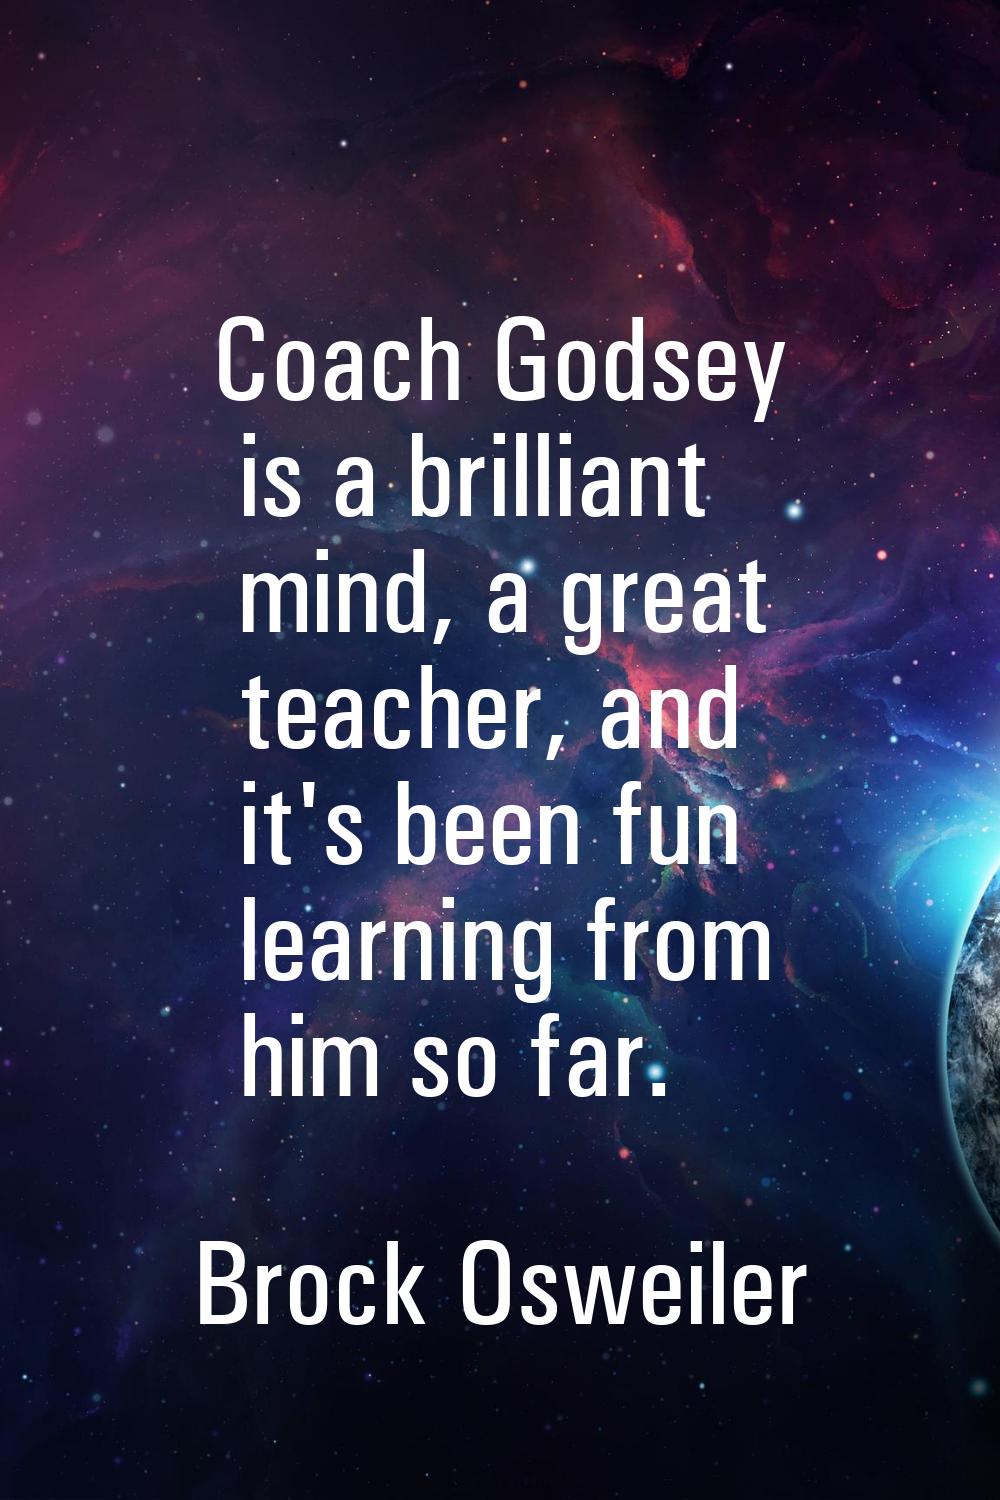 Coach Godsey is a brilliant mind, a great teacher, and it's been fun learning from him so far.